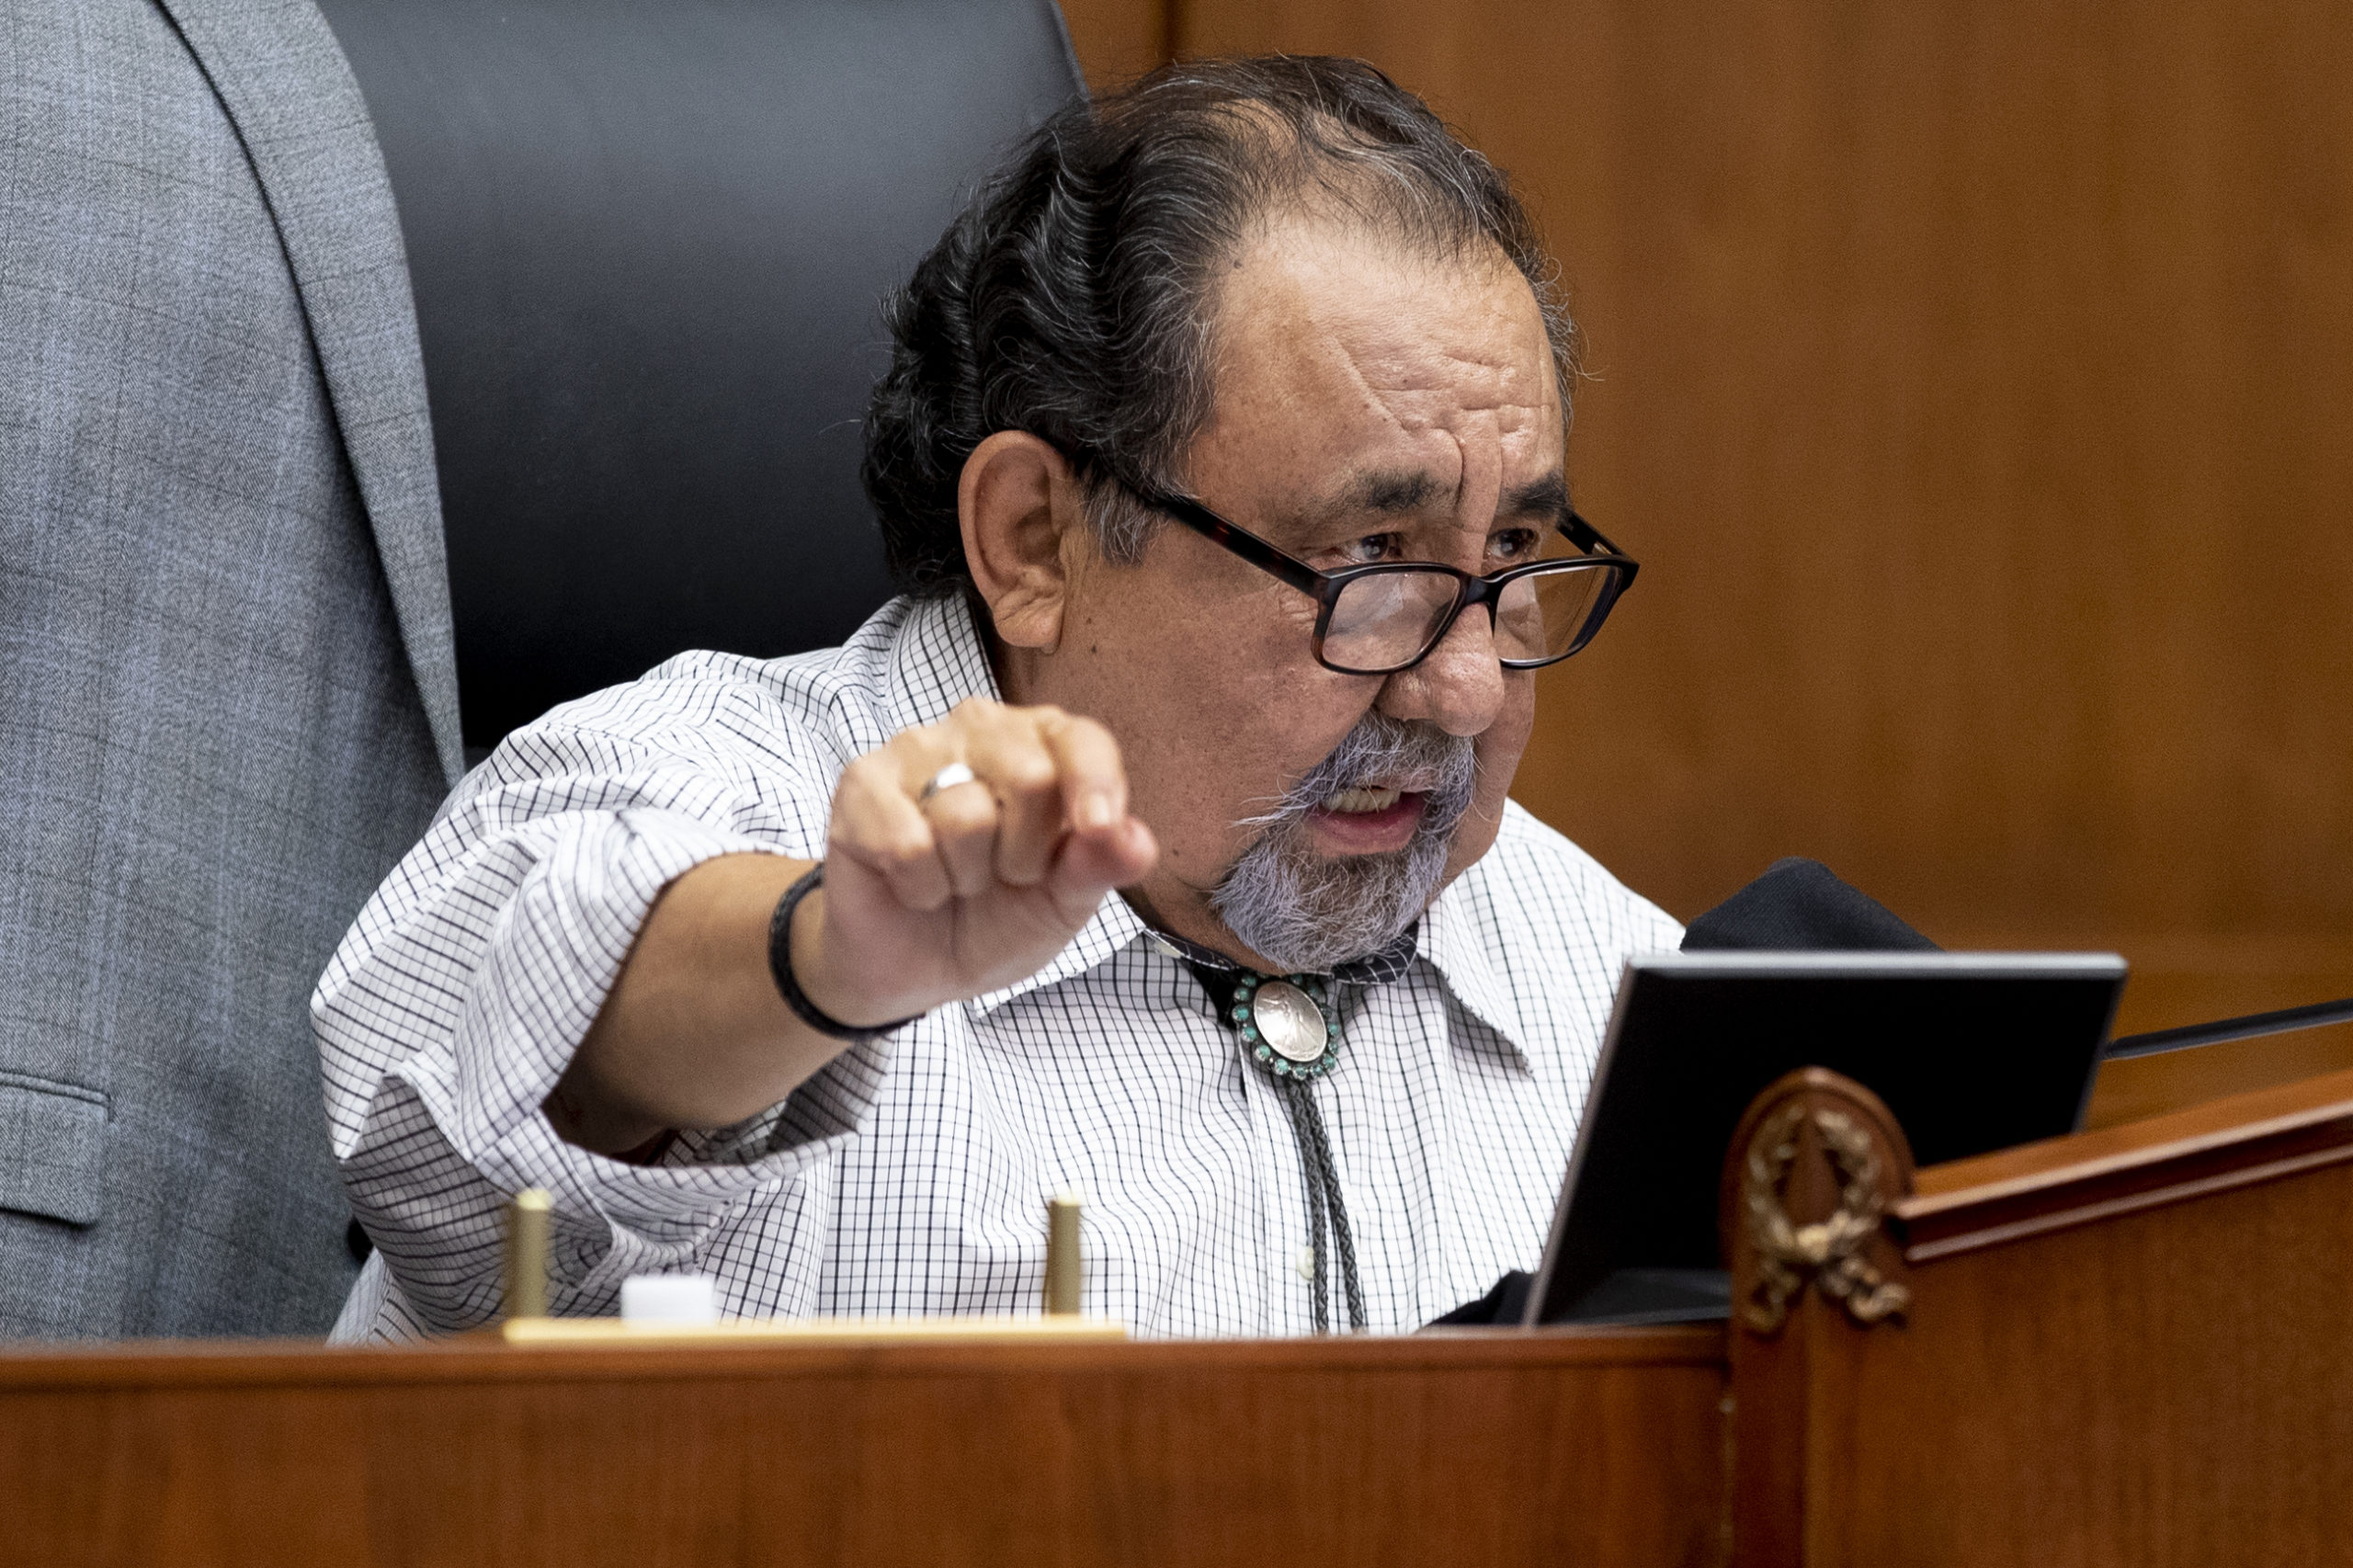 House Natural Resources Committee Chair Raul Grijalva speaks during a hearing on June 29, 2020. (Michael Reynolds/Pool/AFP via Getty Images)